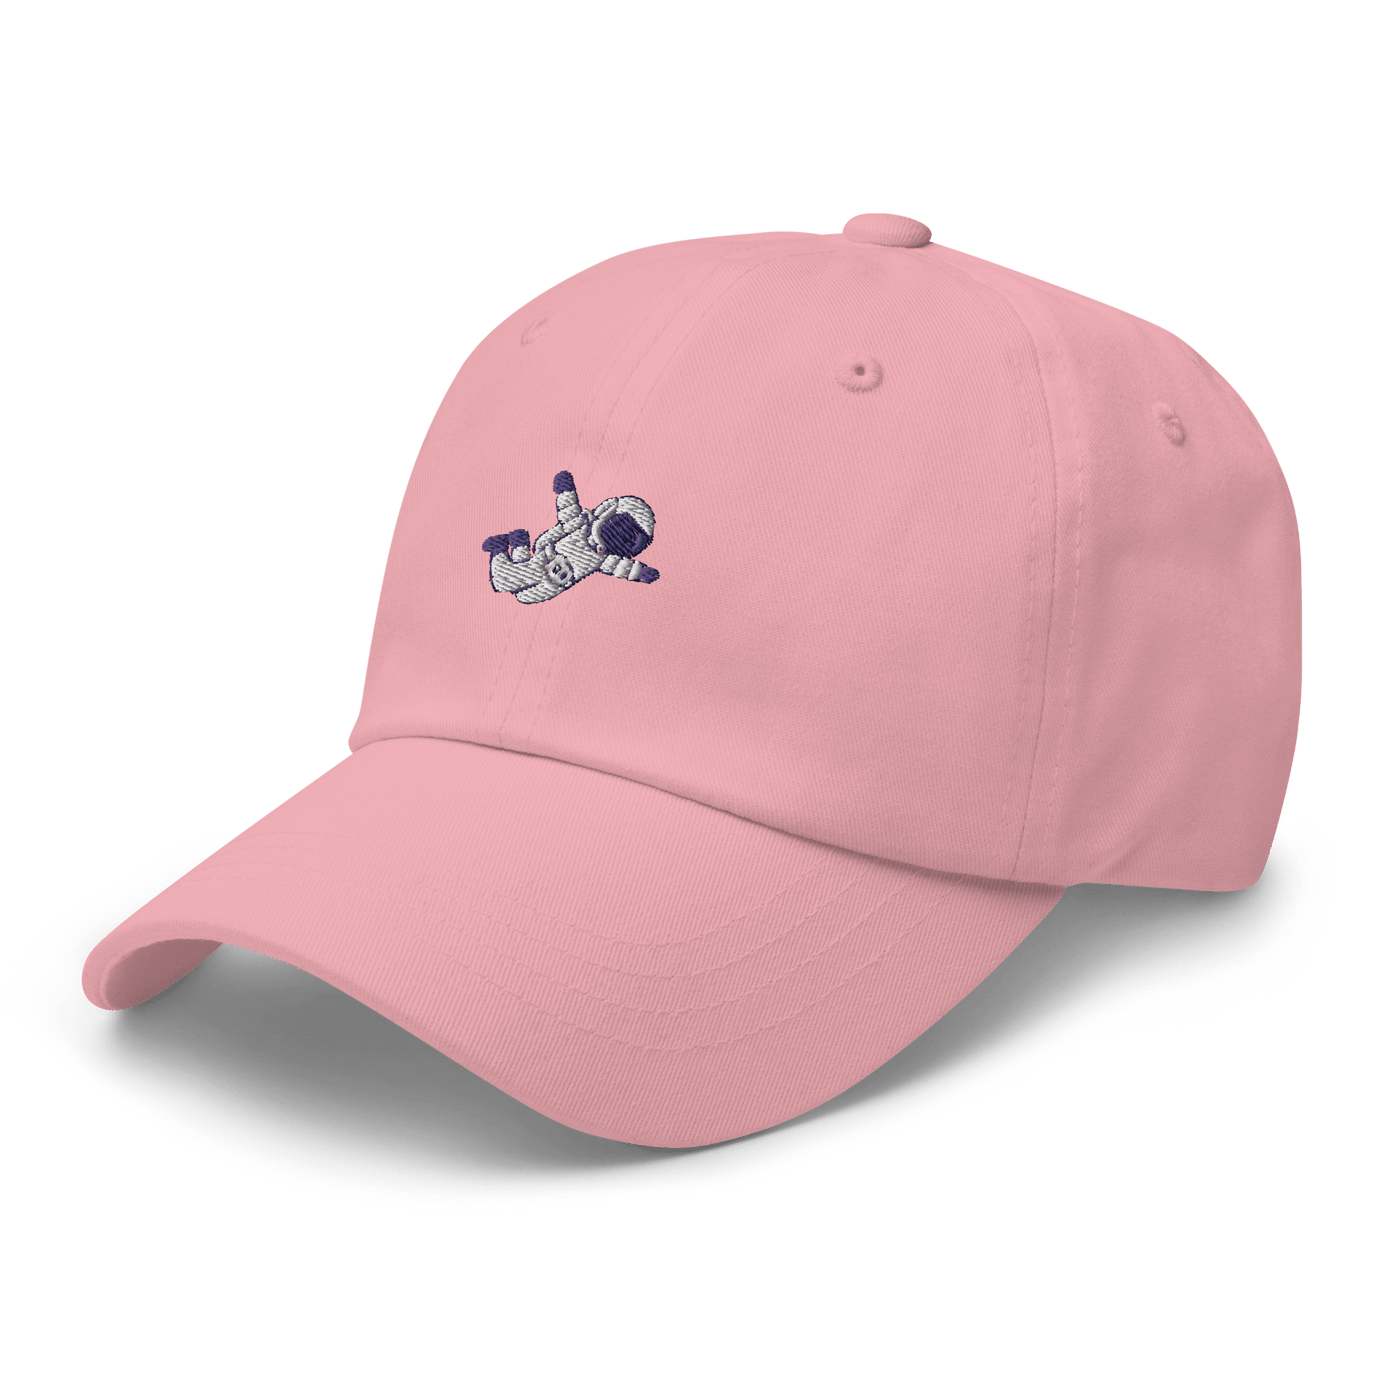 Astronaut Dad hat - Pink - - Just Another Cap Store